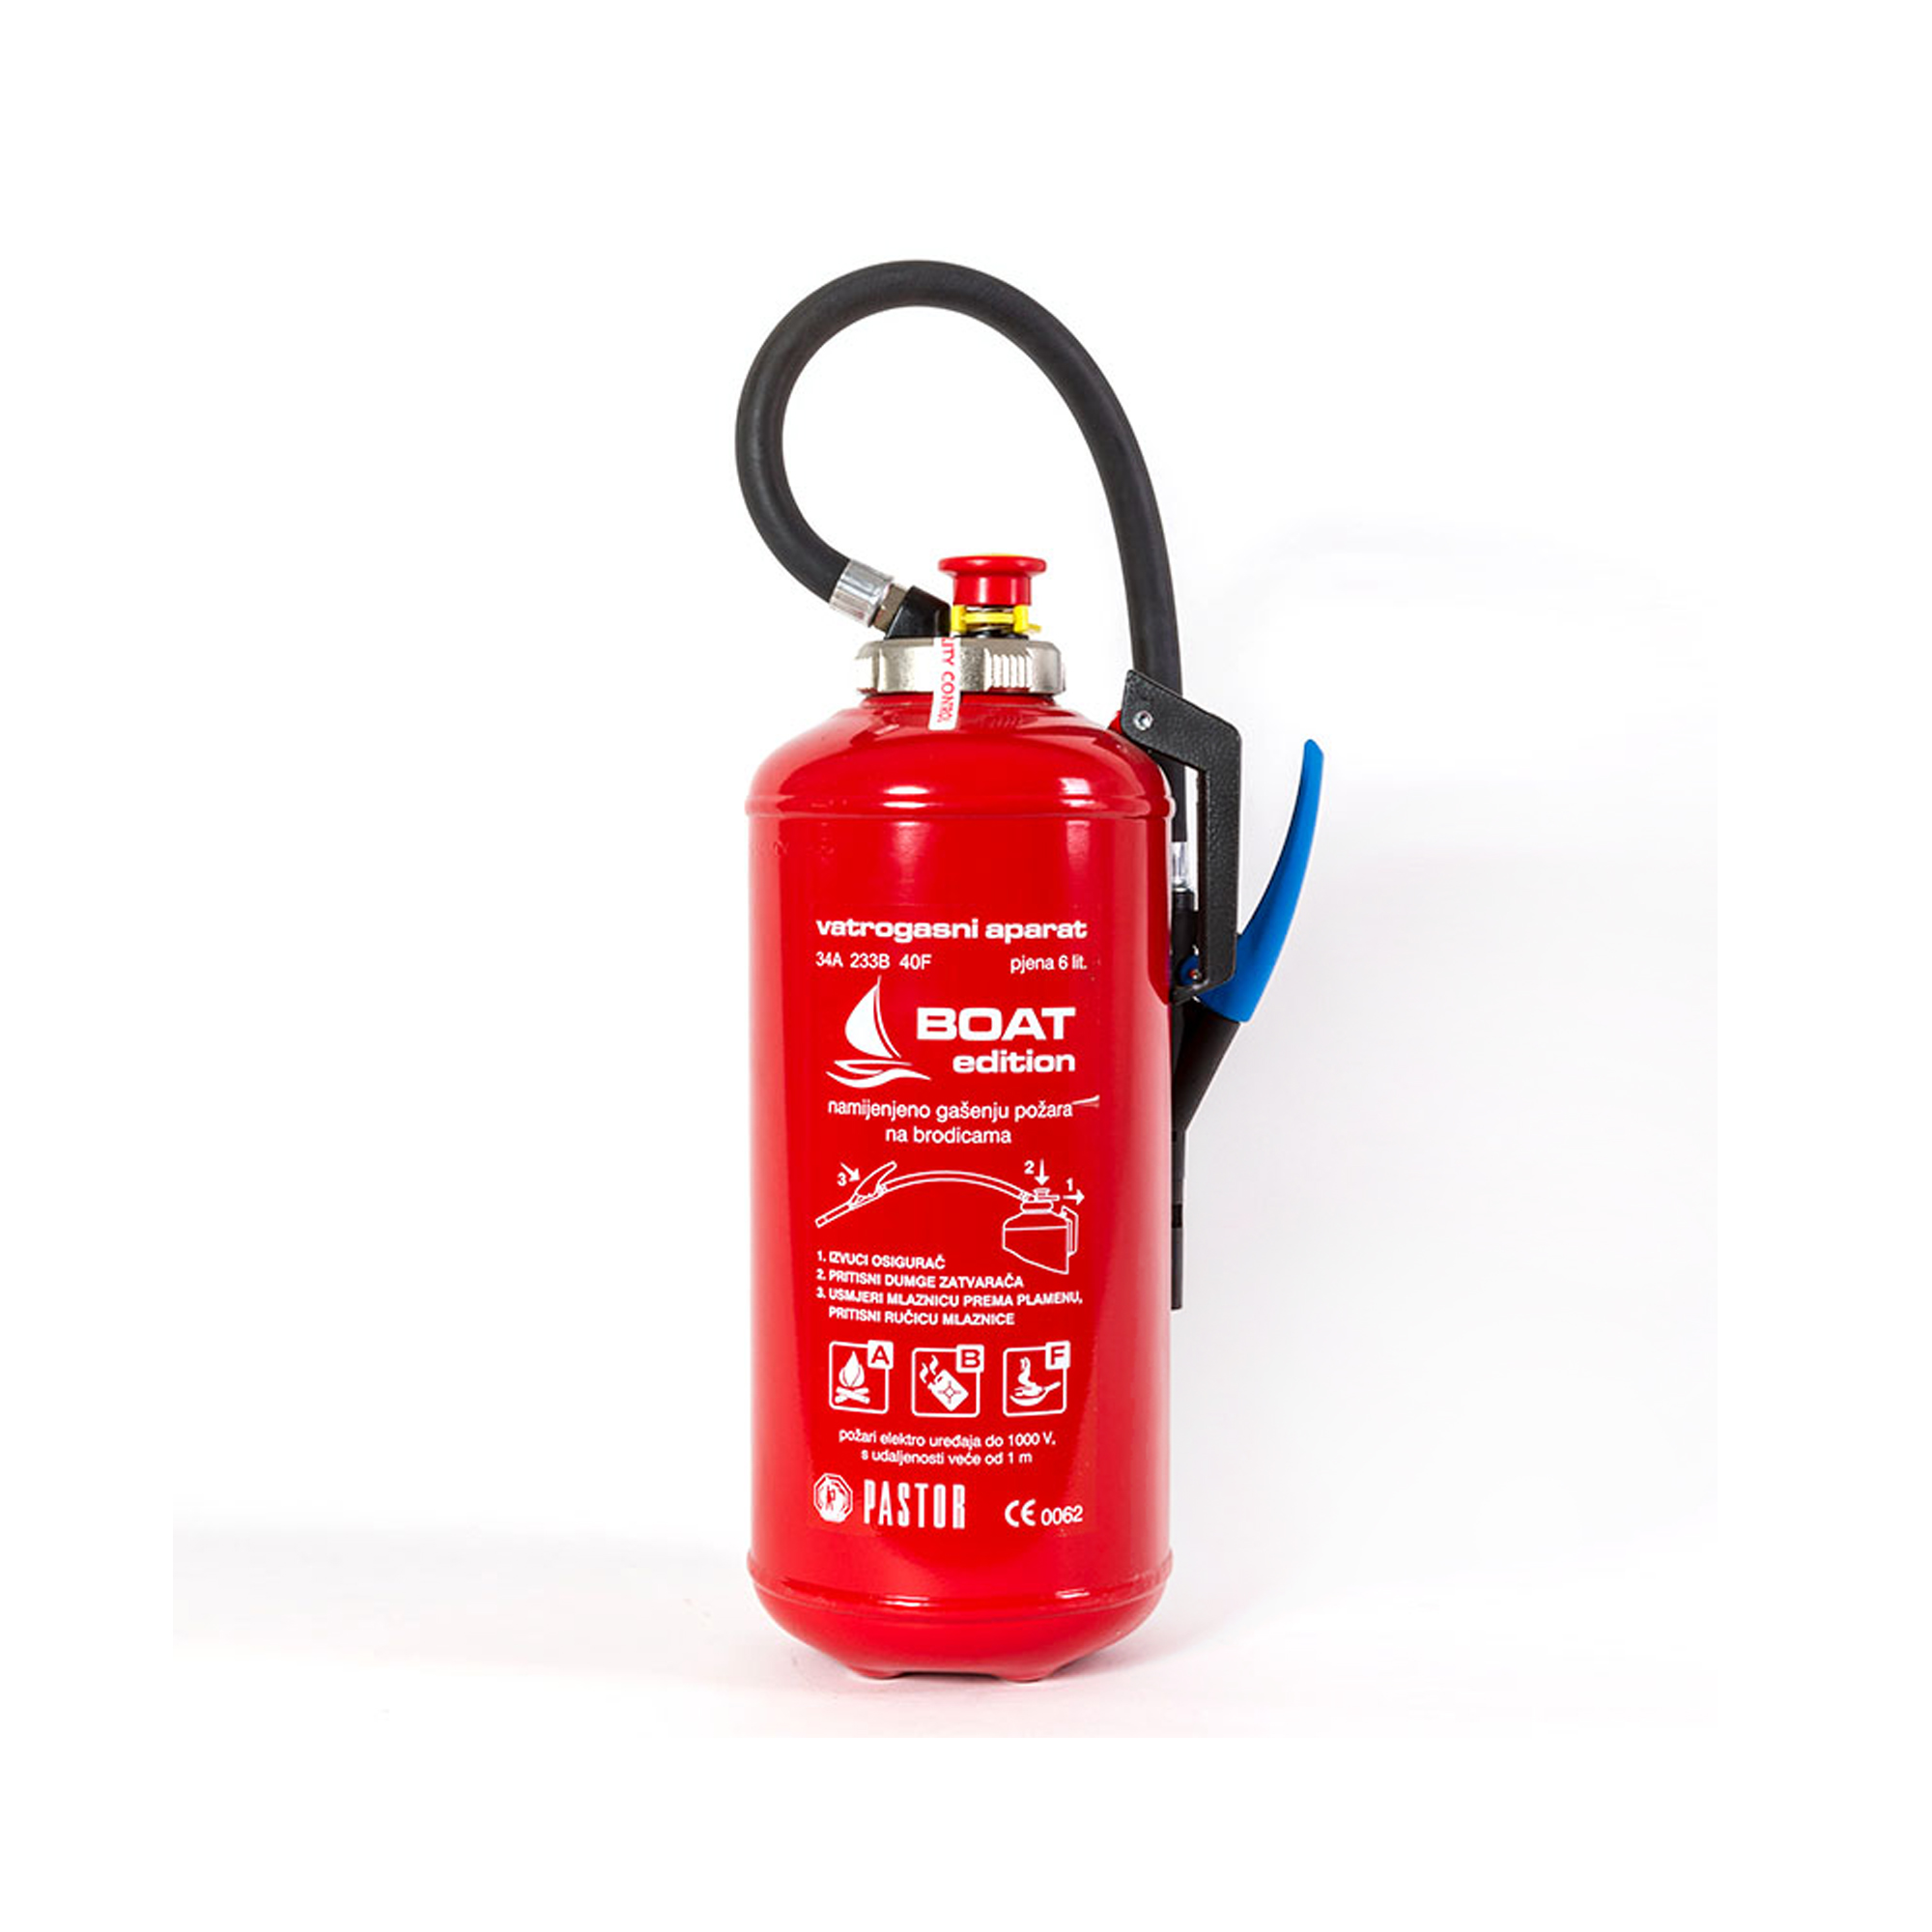 fire extinguisher with foam afff